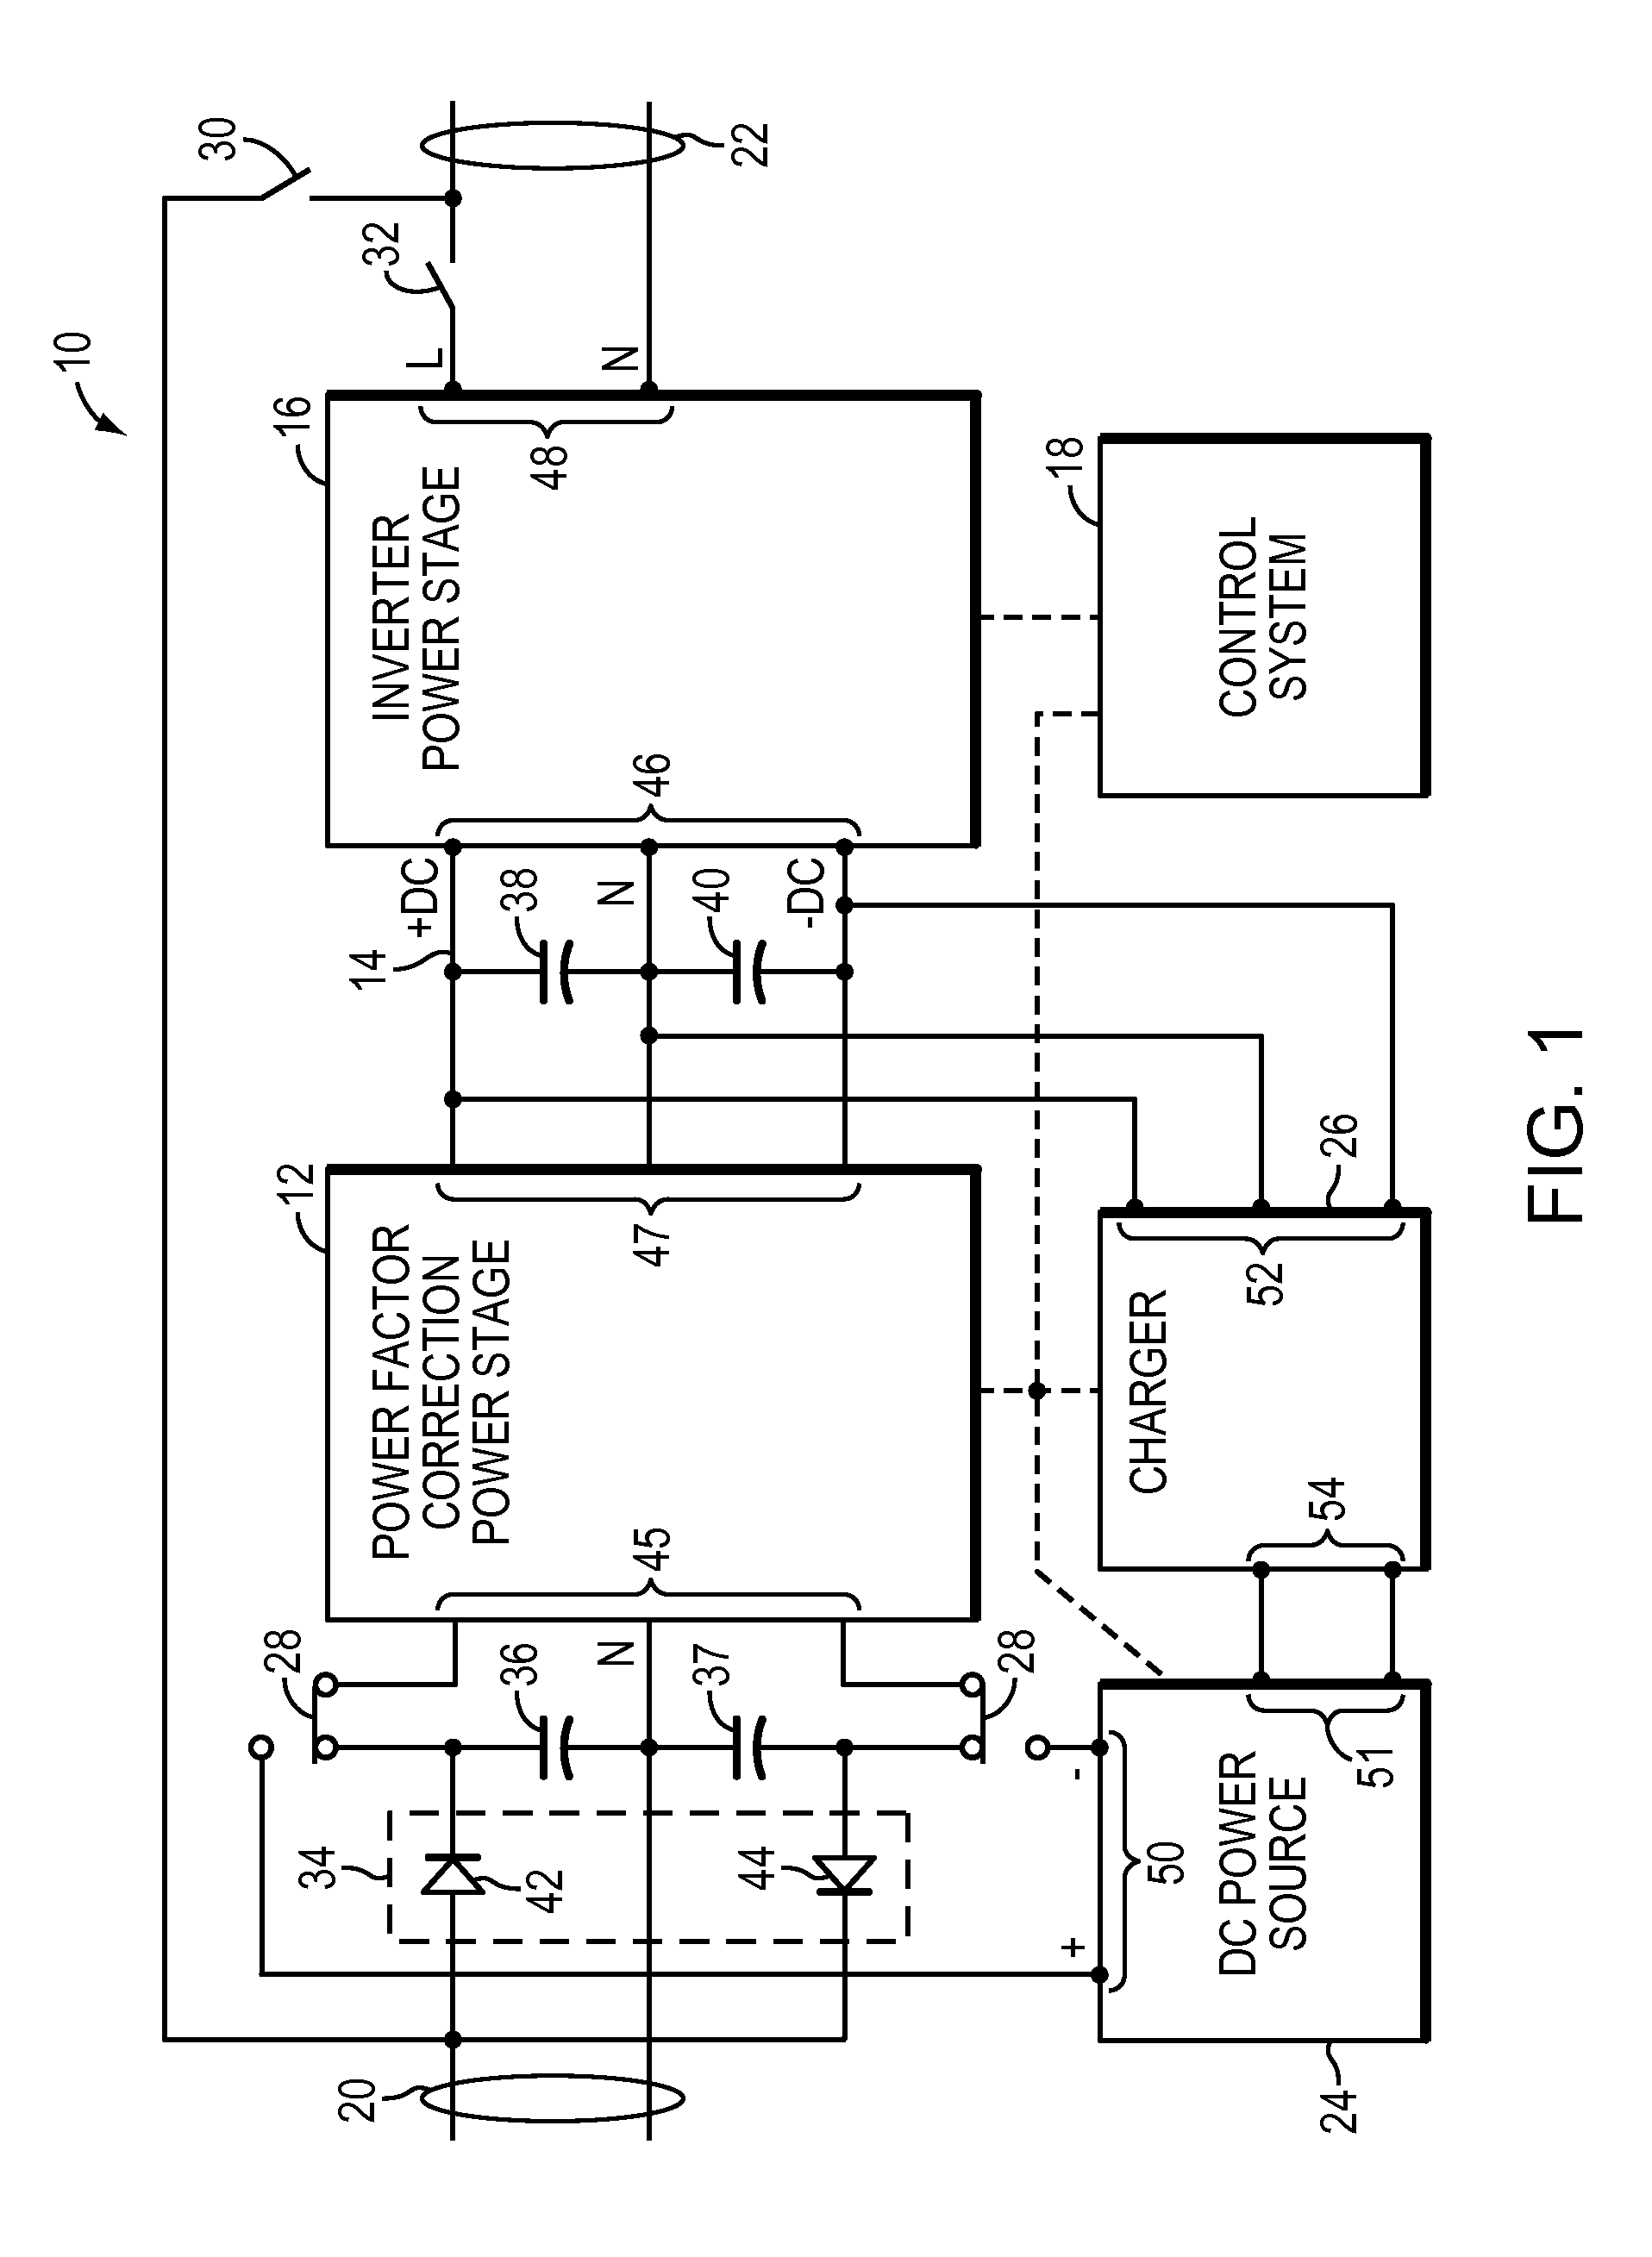 Systems for and methods of controlling operation of a UPS